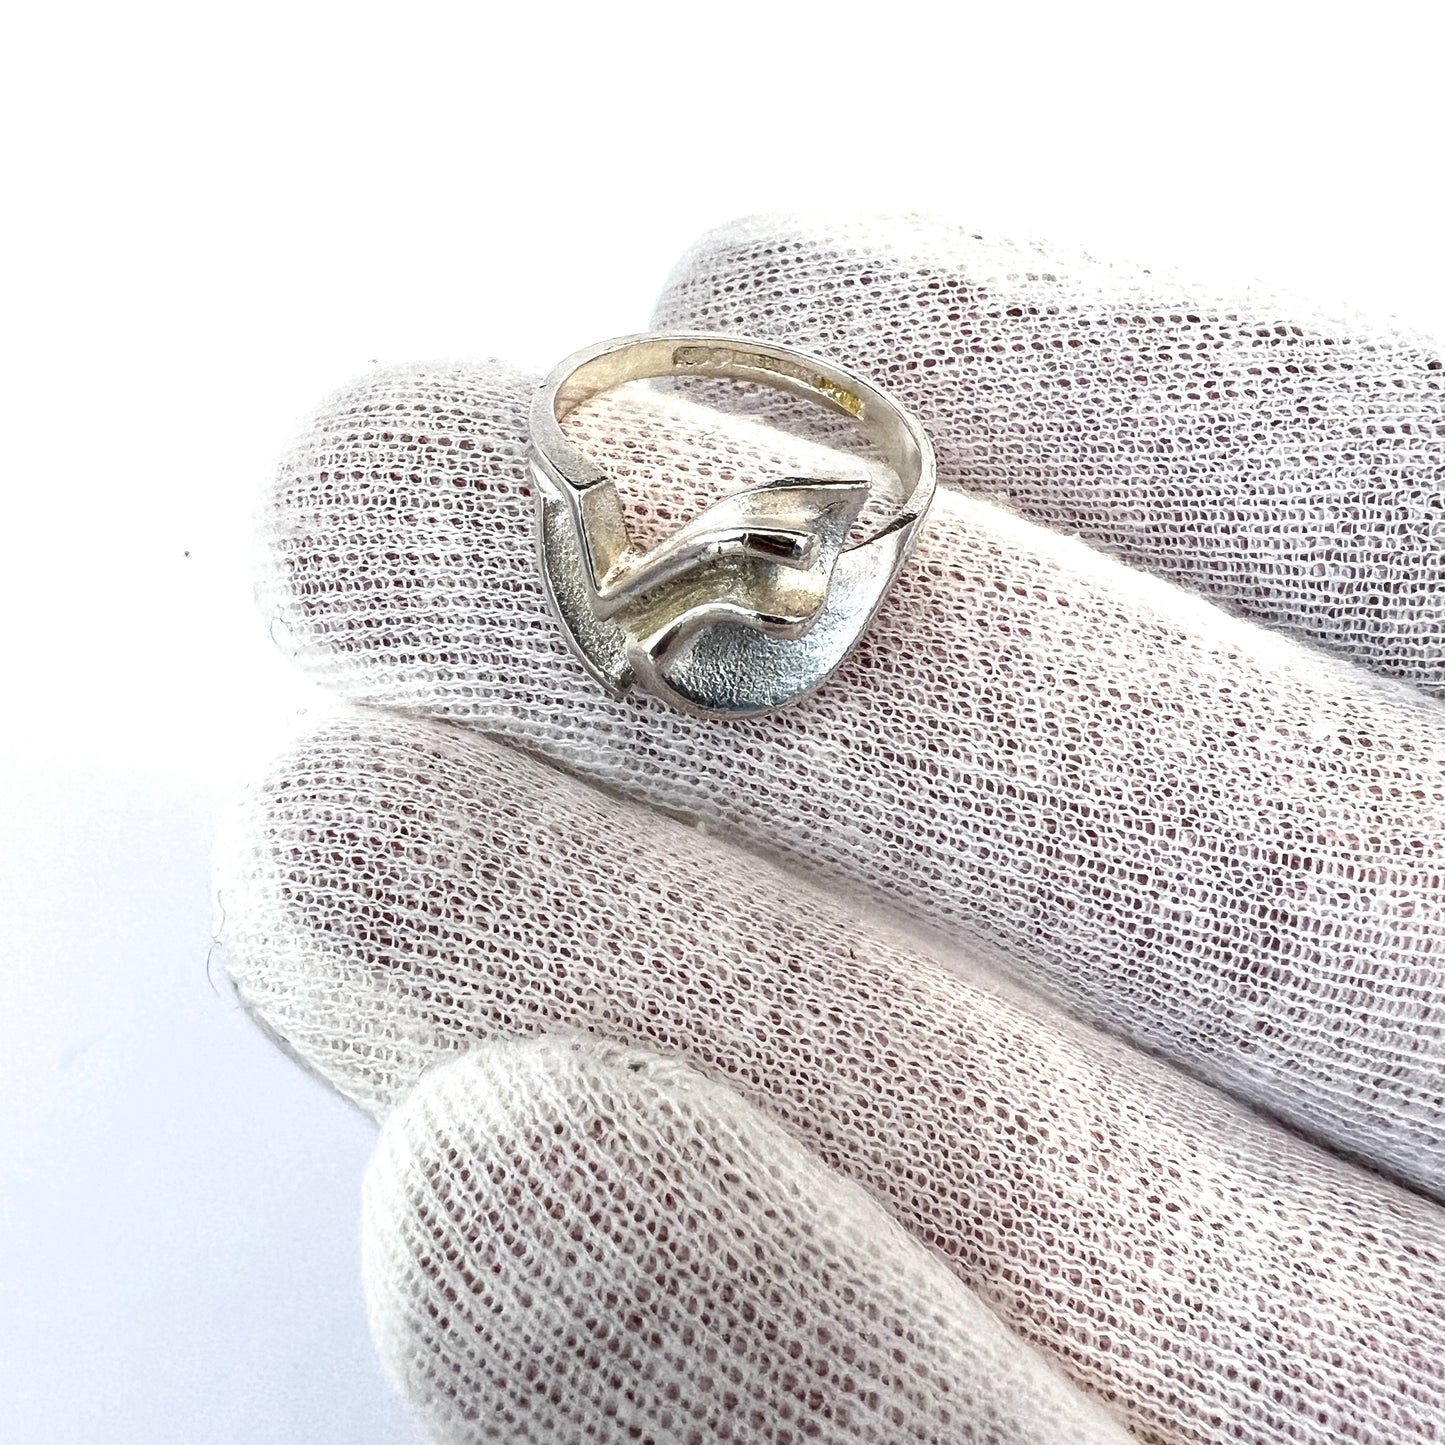 Lapponia, Finland 1985. Vintage Sterling Silver Ring.